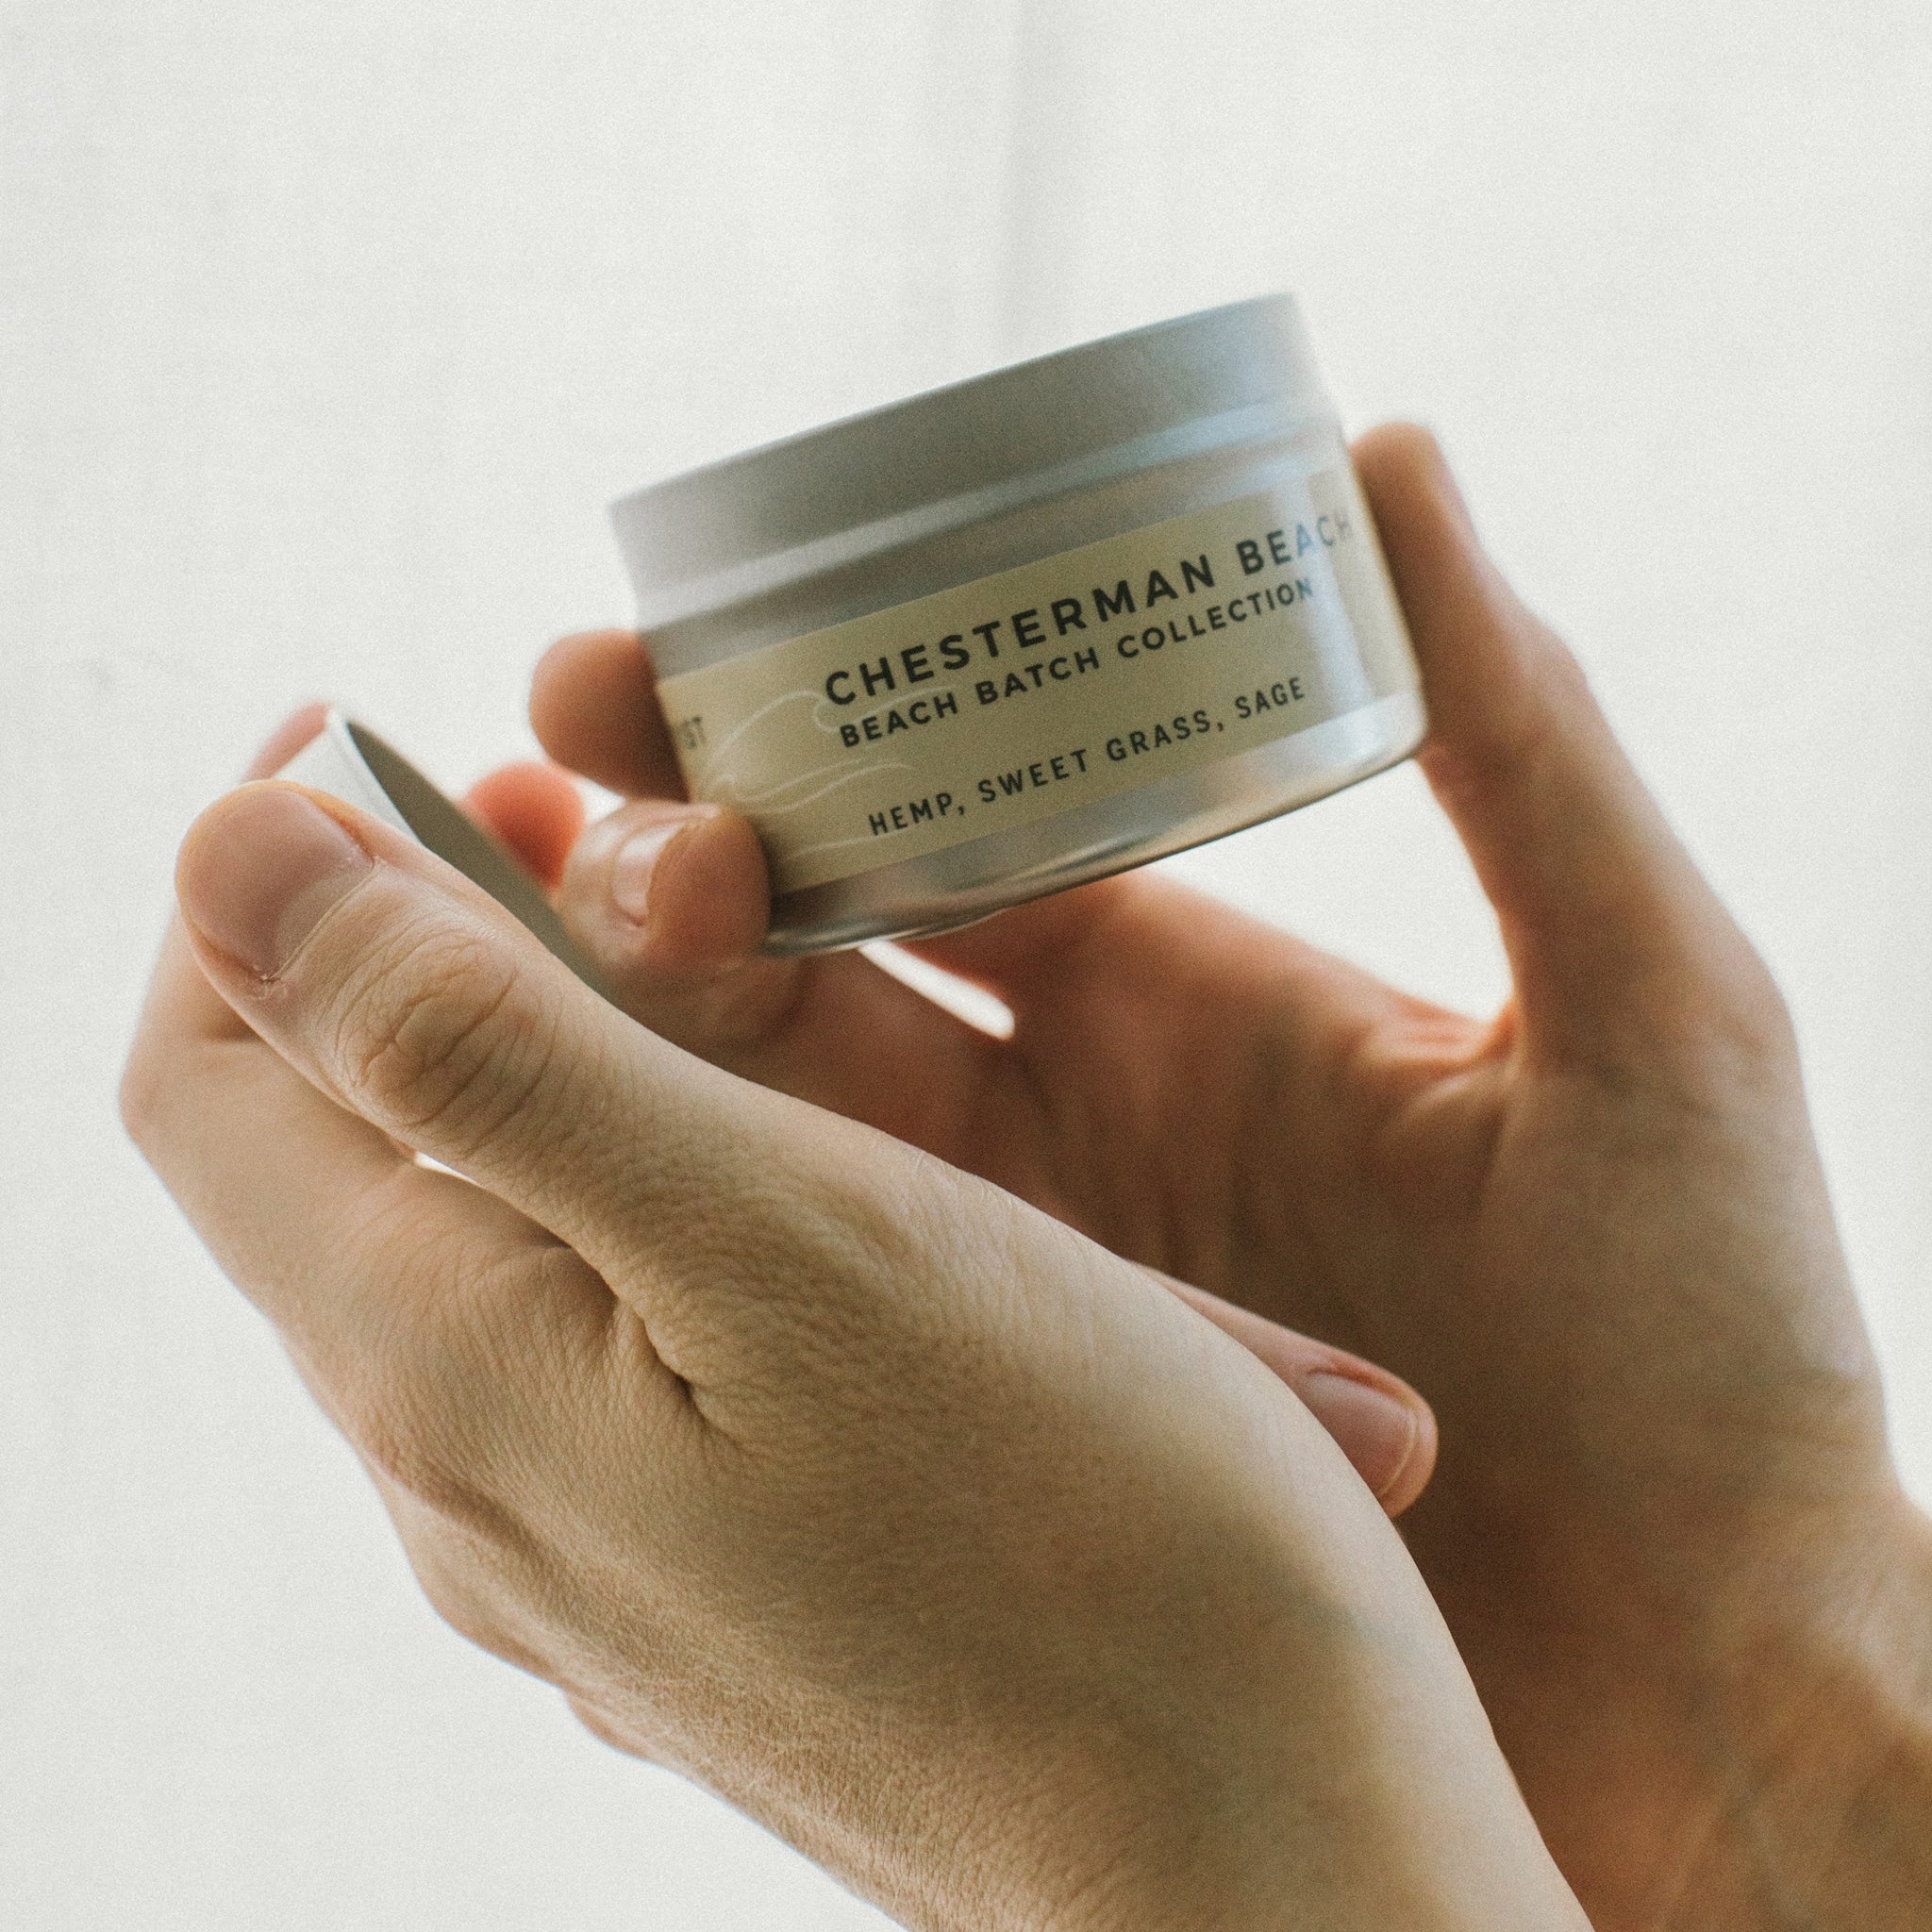 Chesterman Beach | Travel Candle